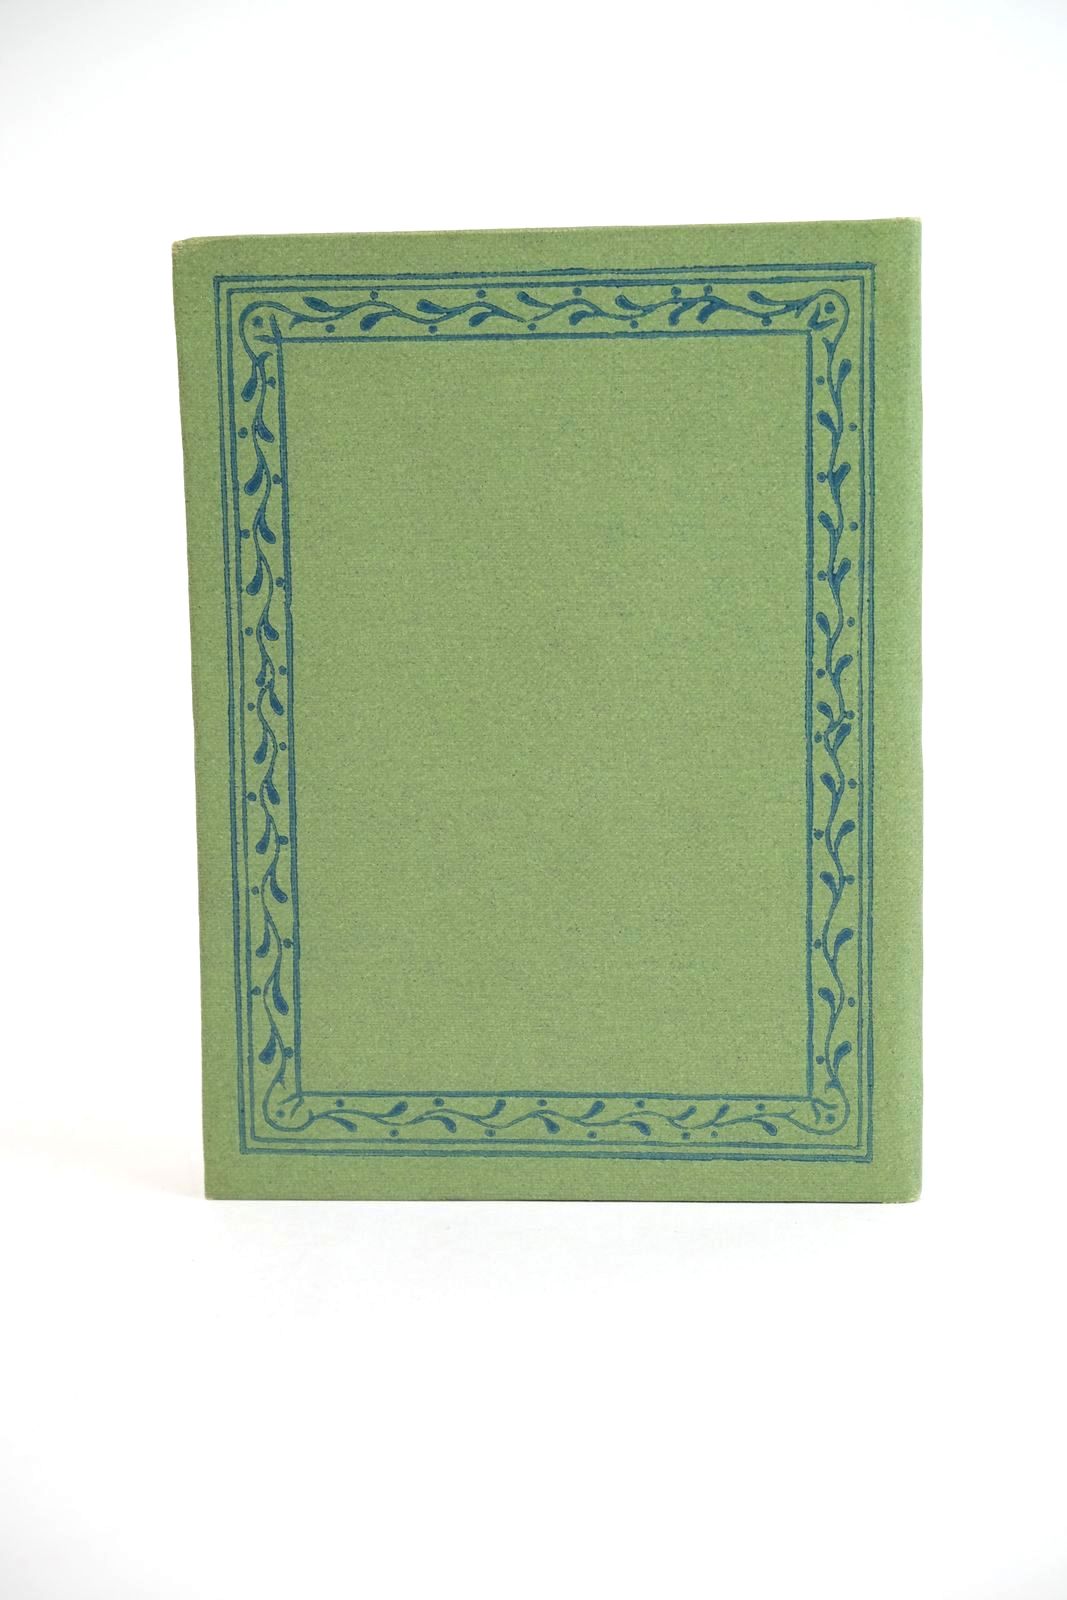 Photo of ALMANACK FOR 1890 illustrated by Greenaway, Kate published by George Routledge & Sons (STOCK CODE: 1323493)  for sale by Stella & Rose's Books